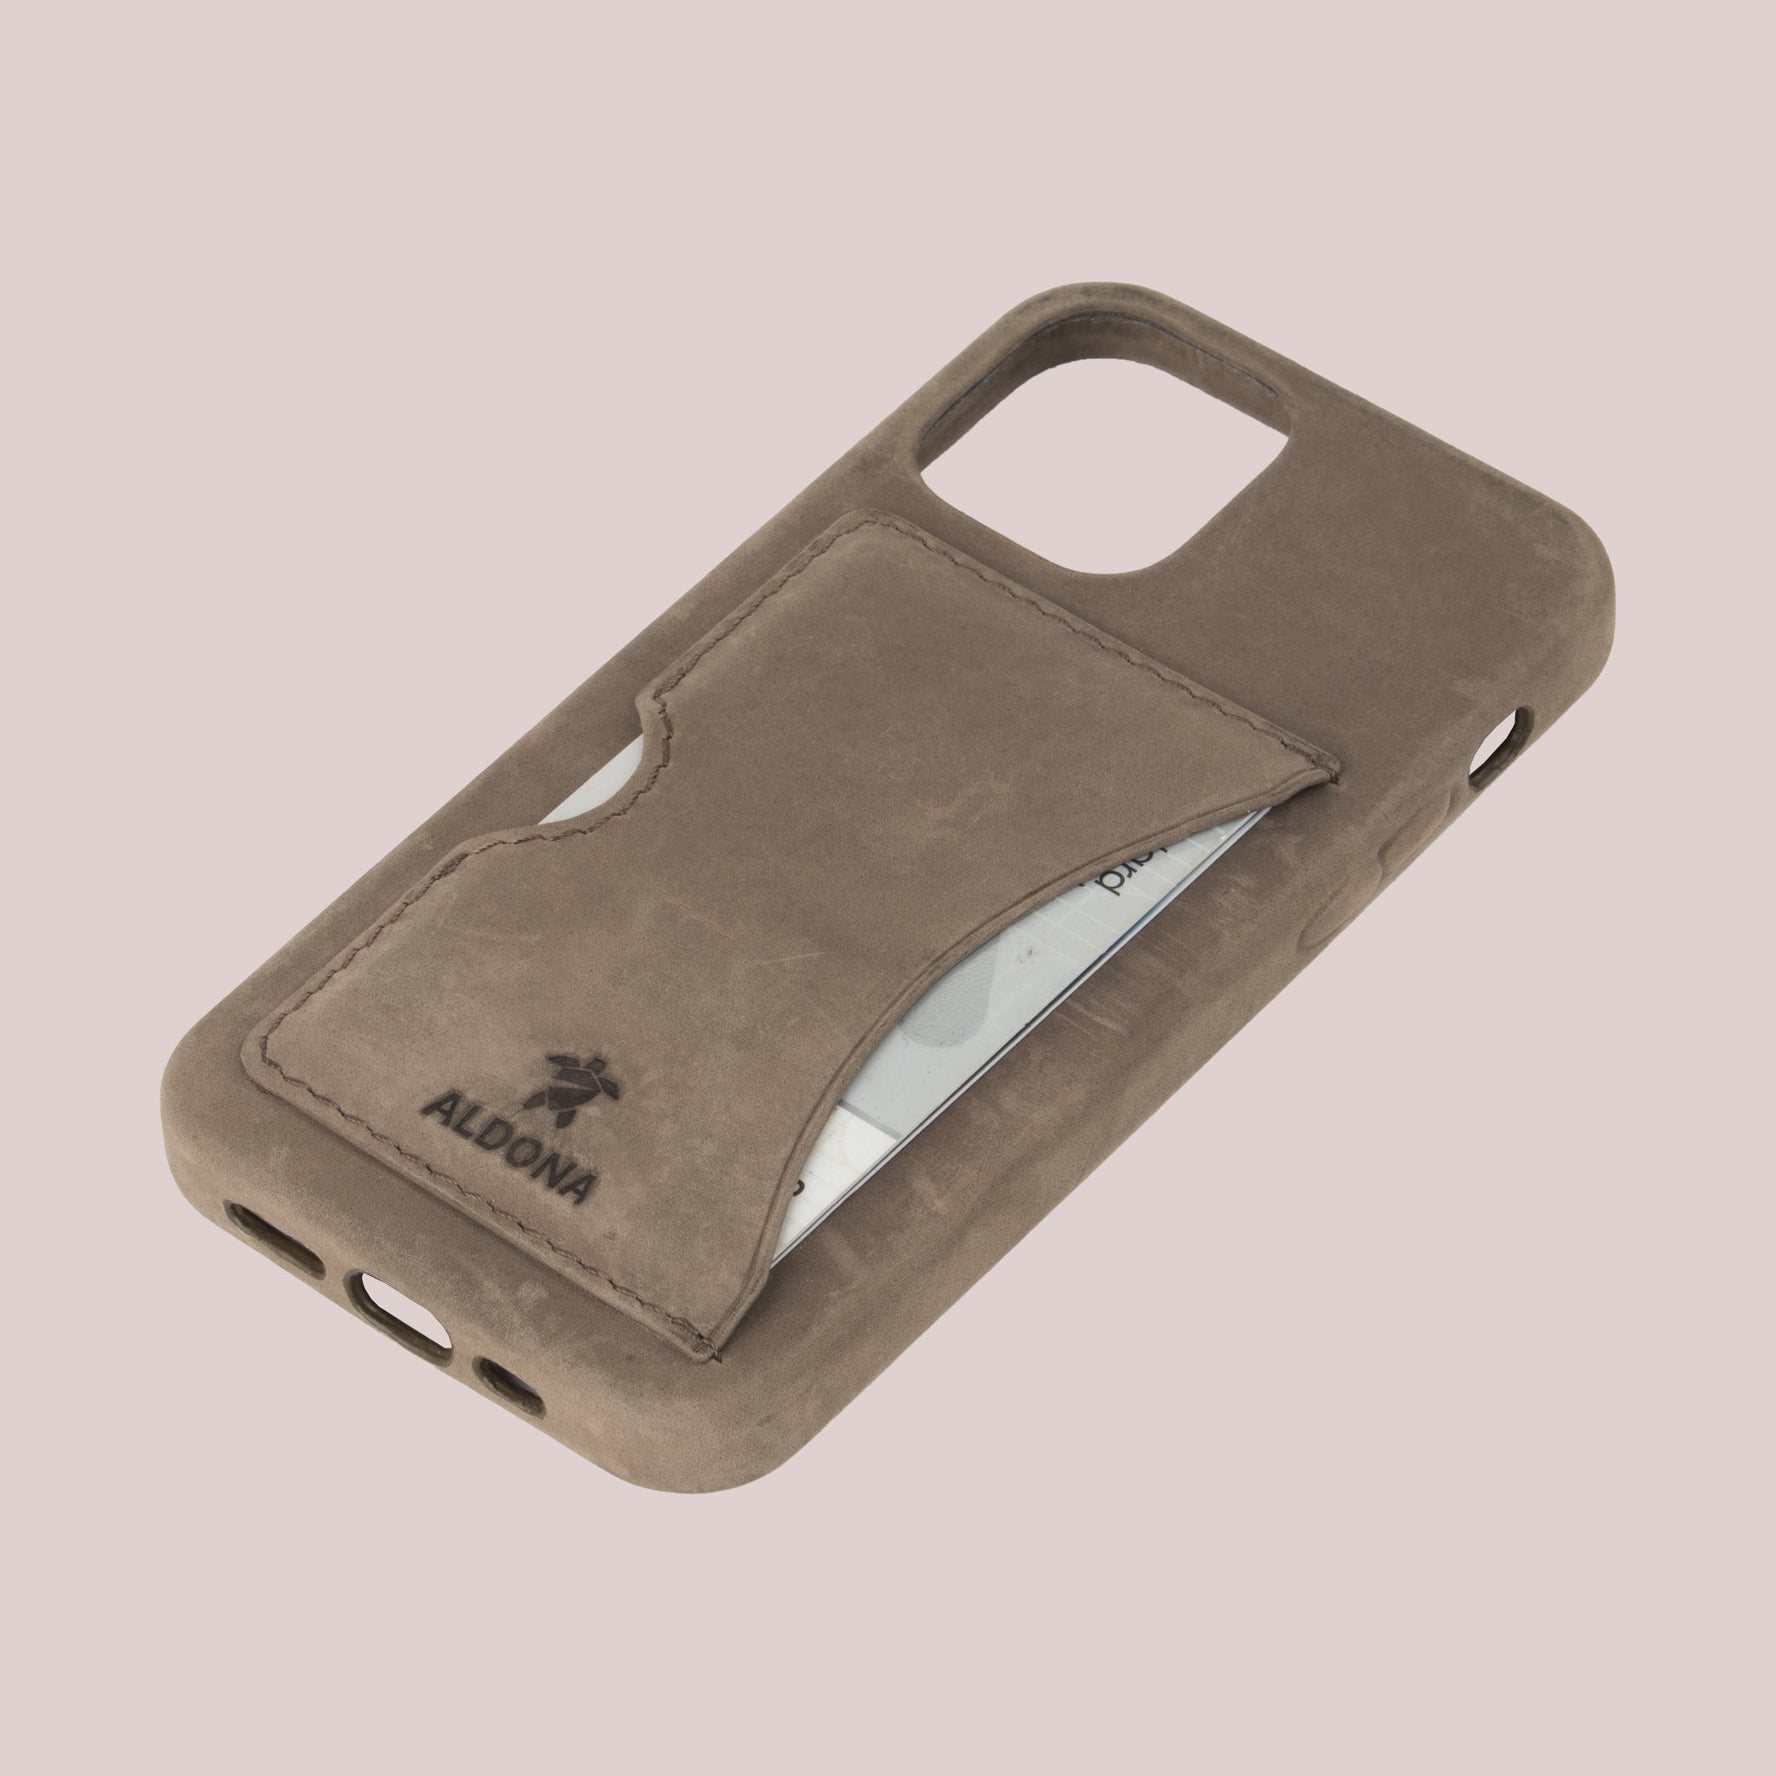 Baxter Card Case for iPhone 12 Pro Max - Burnt Tobacco